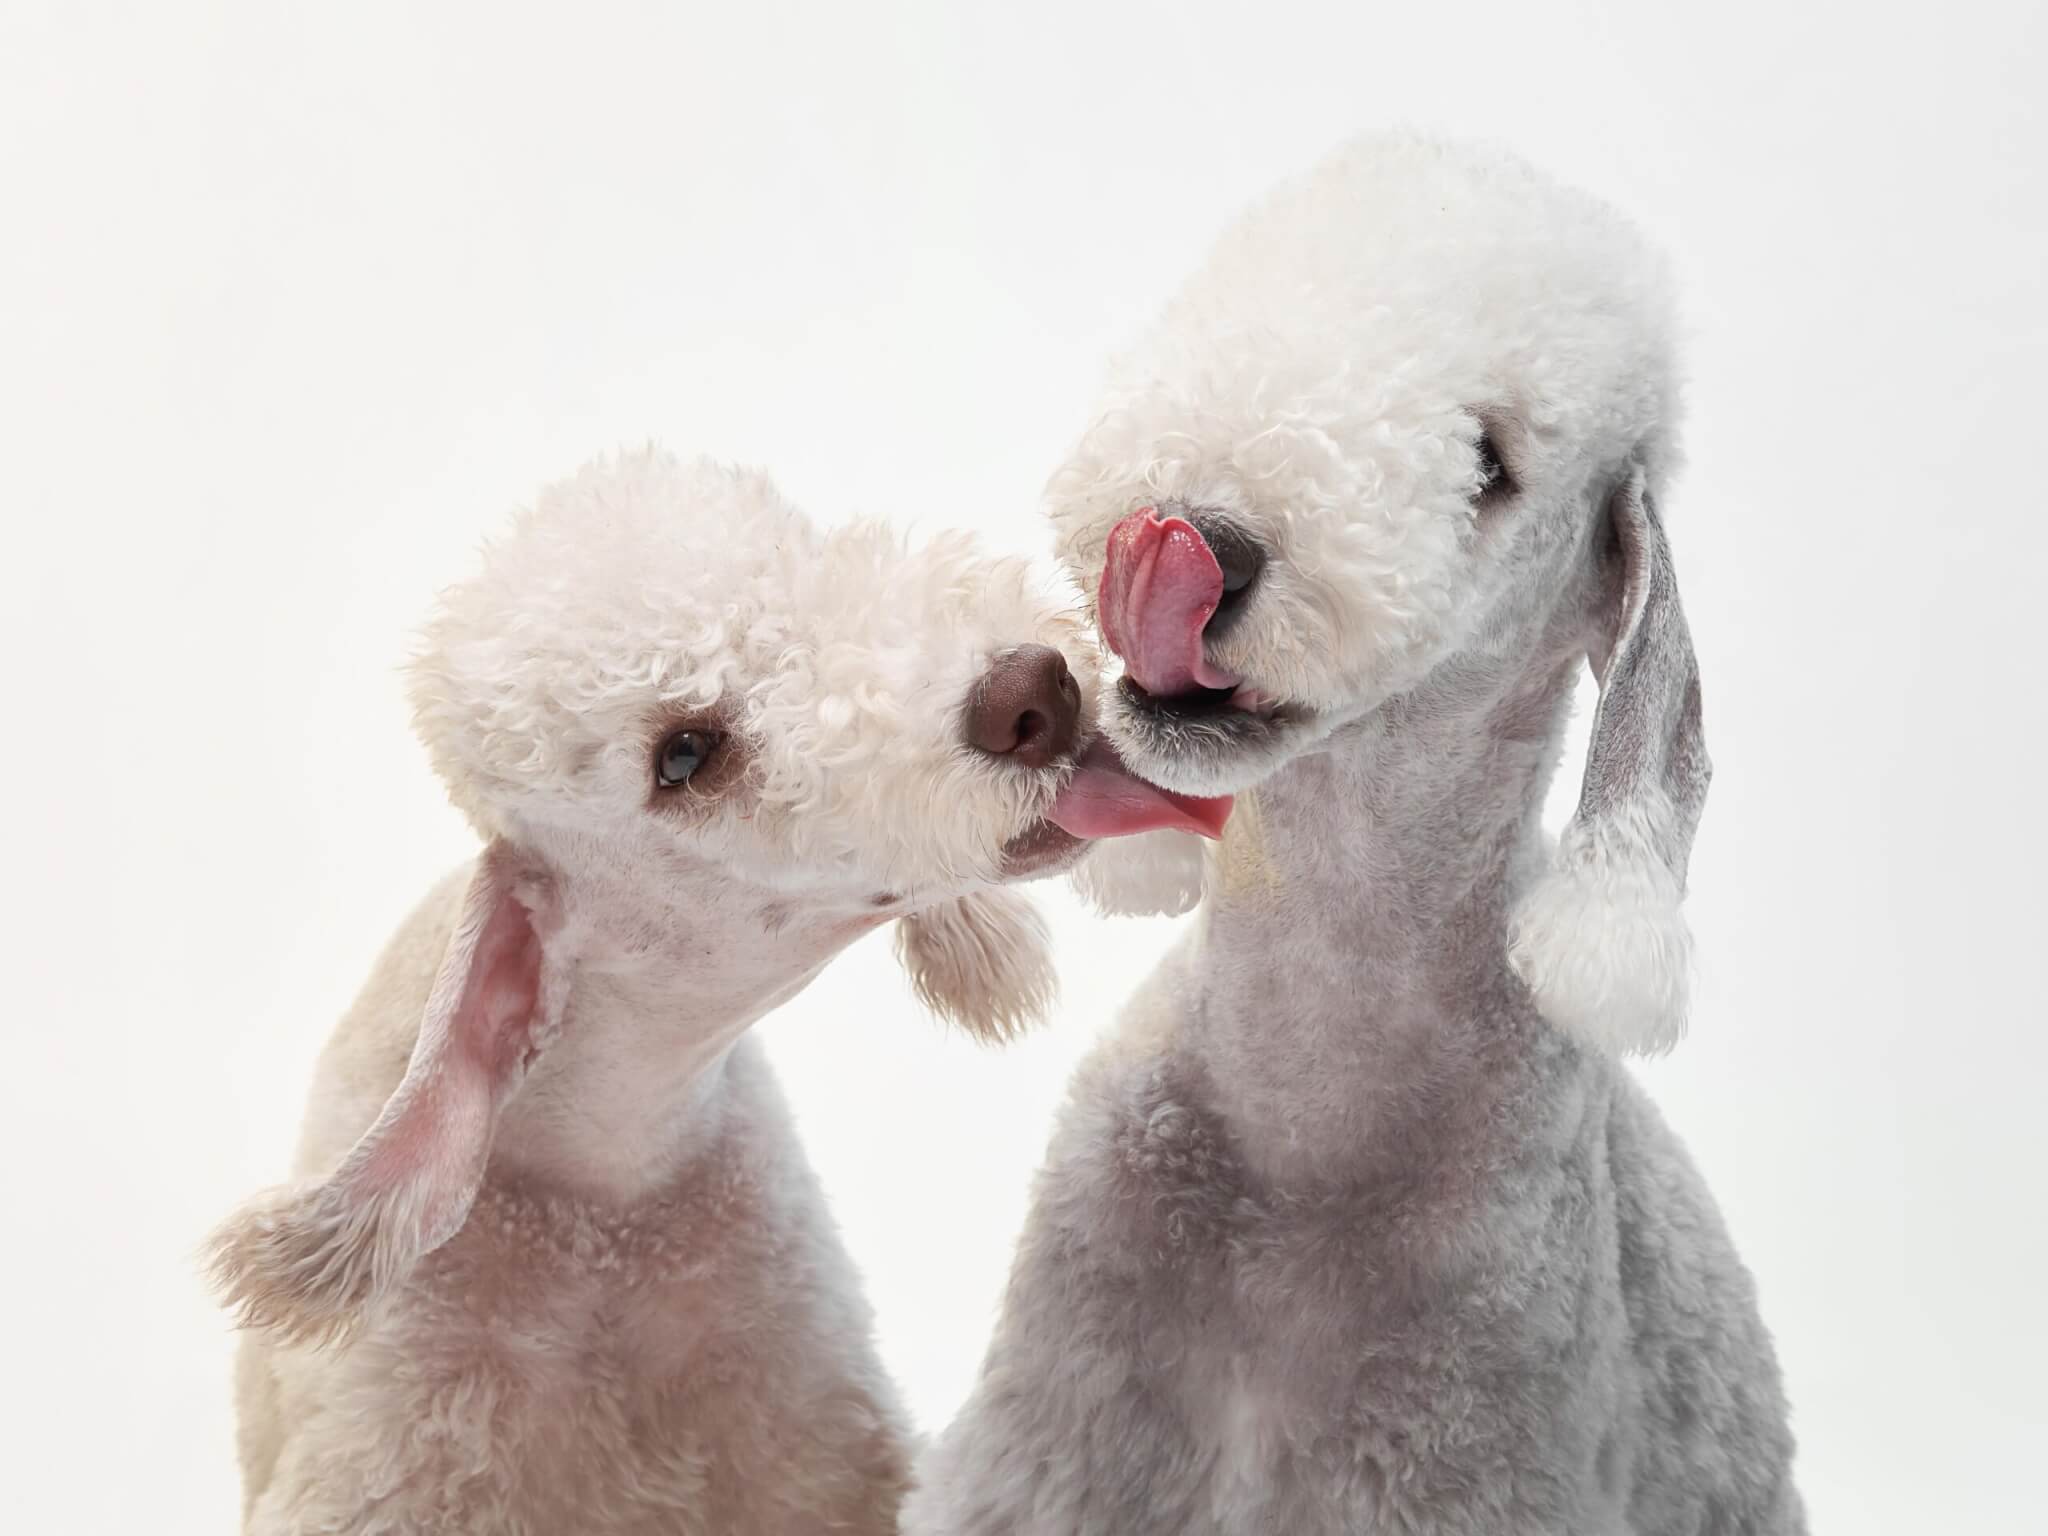 Two Bedlington Terriers licking each other